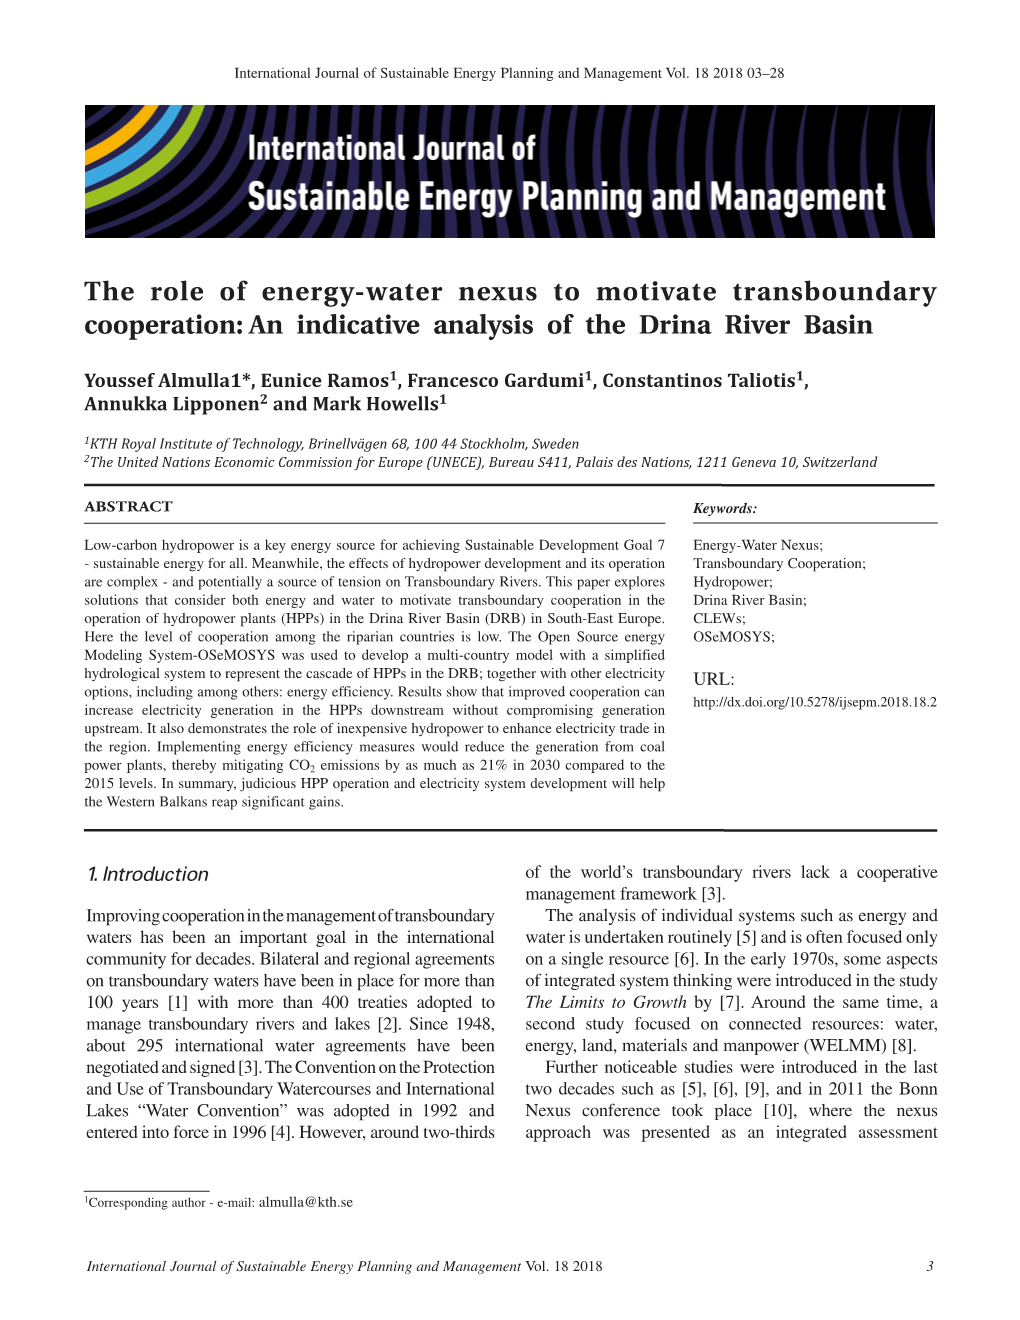 The Role of Energy-Water Nexus to Motivate Transboundary Cooperation: an Indicative Analysis of the Drina River Basin